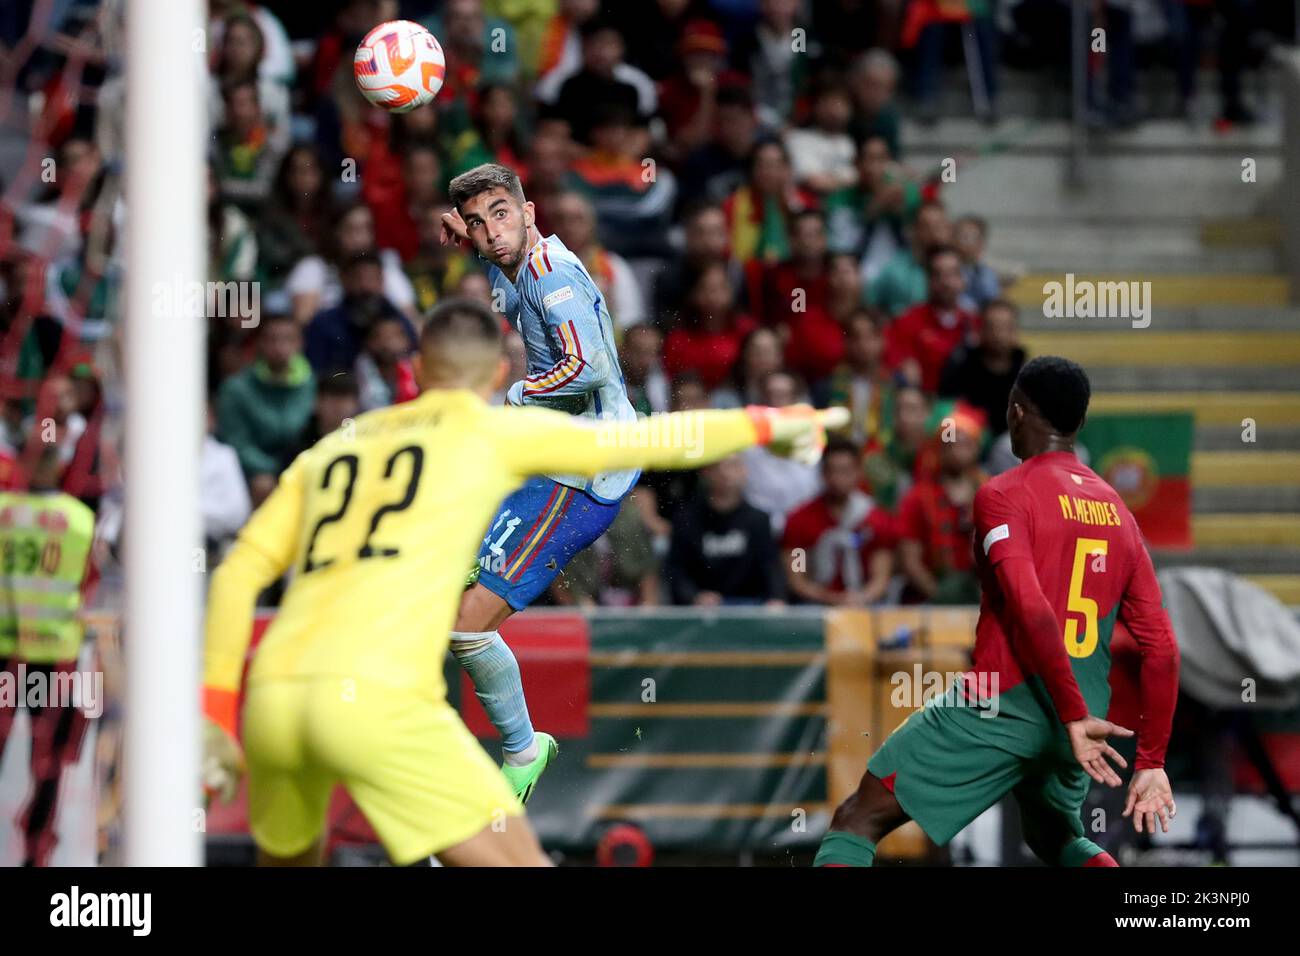 Lisbon, Portugal. 27th Sep, 2022. Ferran Torres (C) of Spain heads the ball during the League A Group 2 match against Portugal at the 2022 UEFA Nations League in Lisbon, Portugal, Sept. 27, 2022. Credit: Pedro Fiuza/Xinhua/Alamy Live News Stock Photo